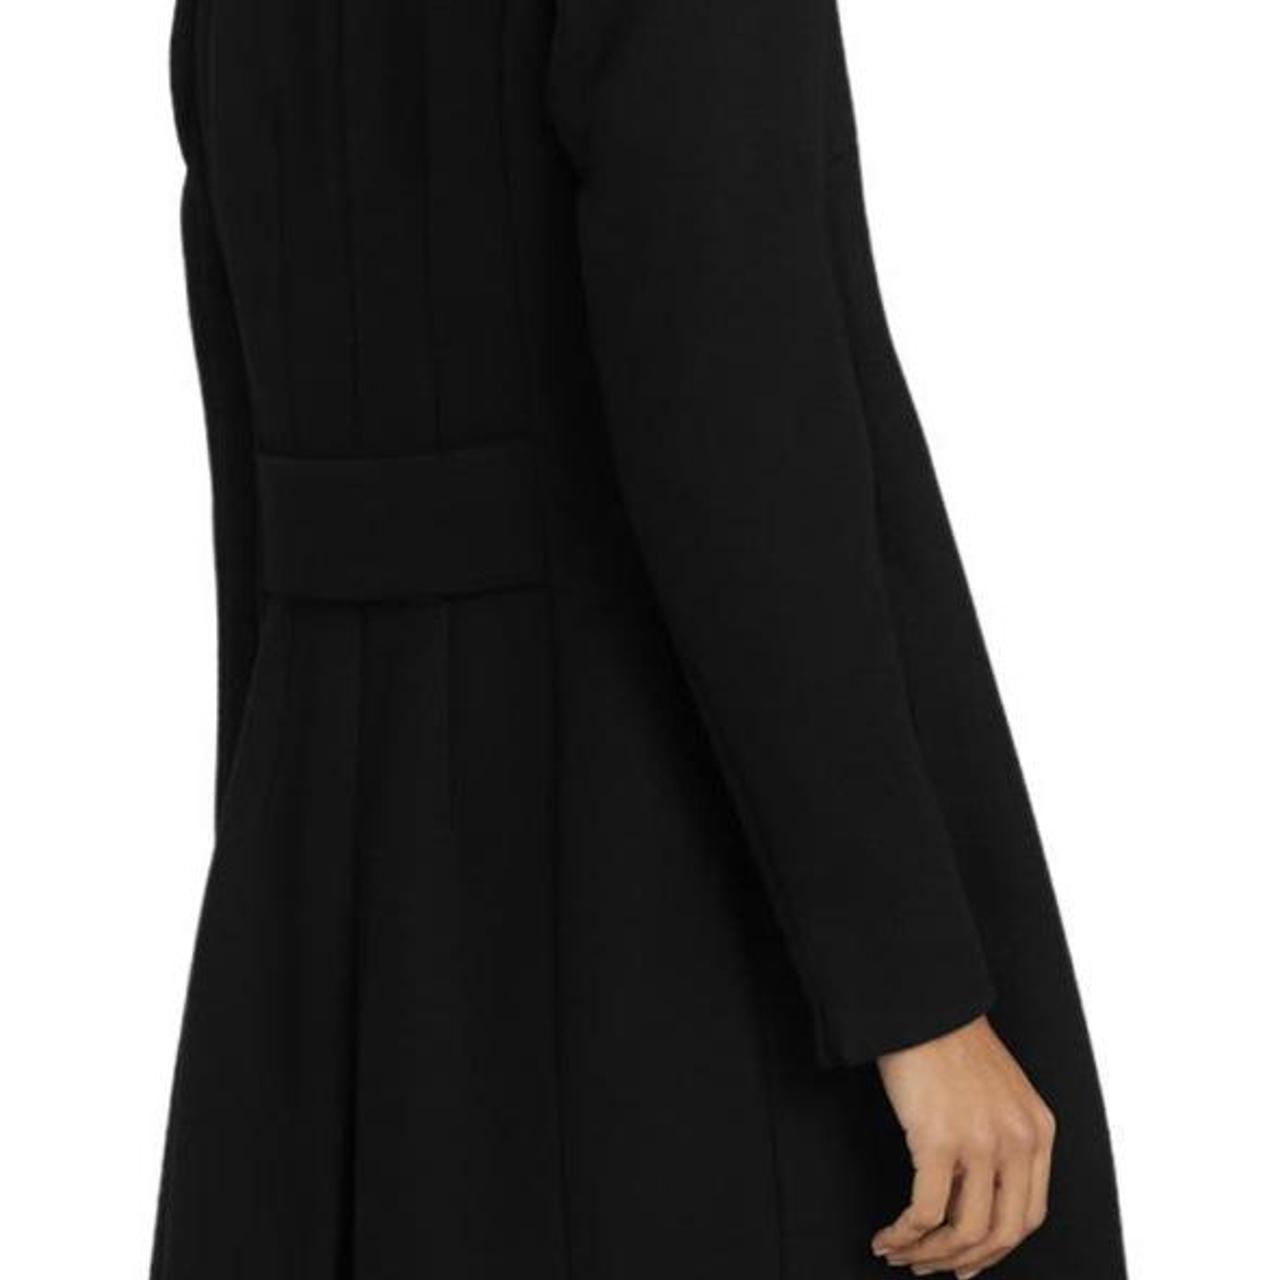 Product Image 3 - Reiss Marcie wool blend coat

Size